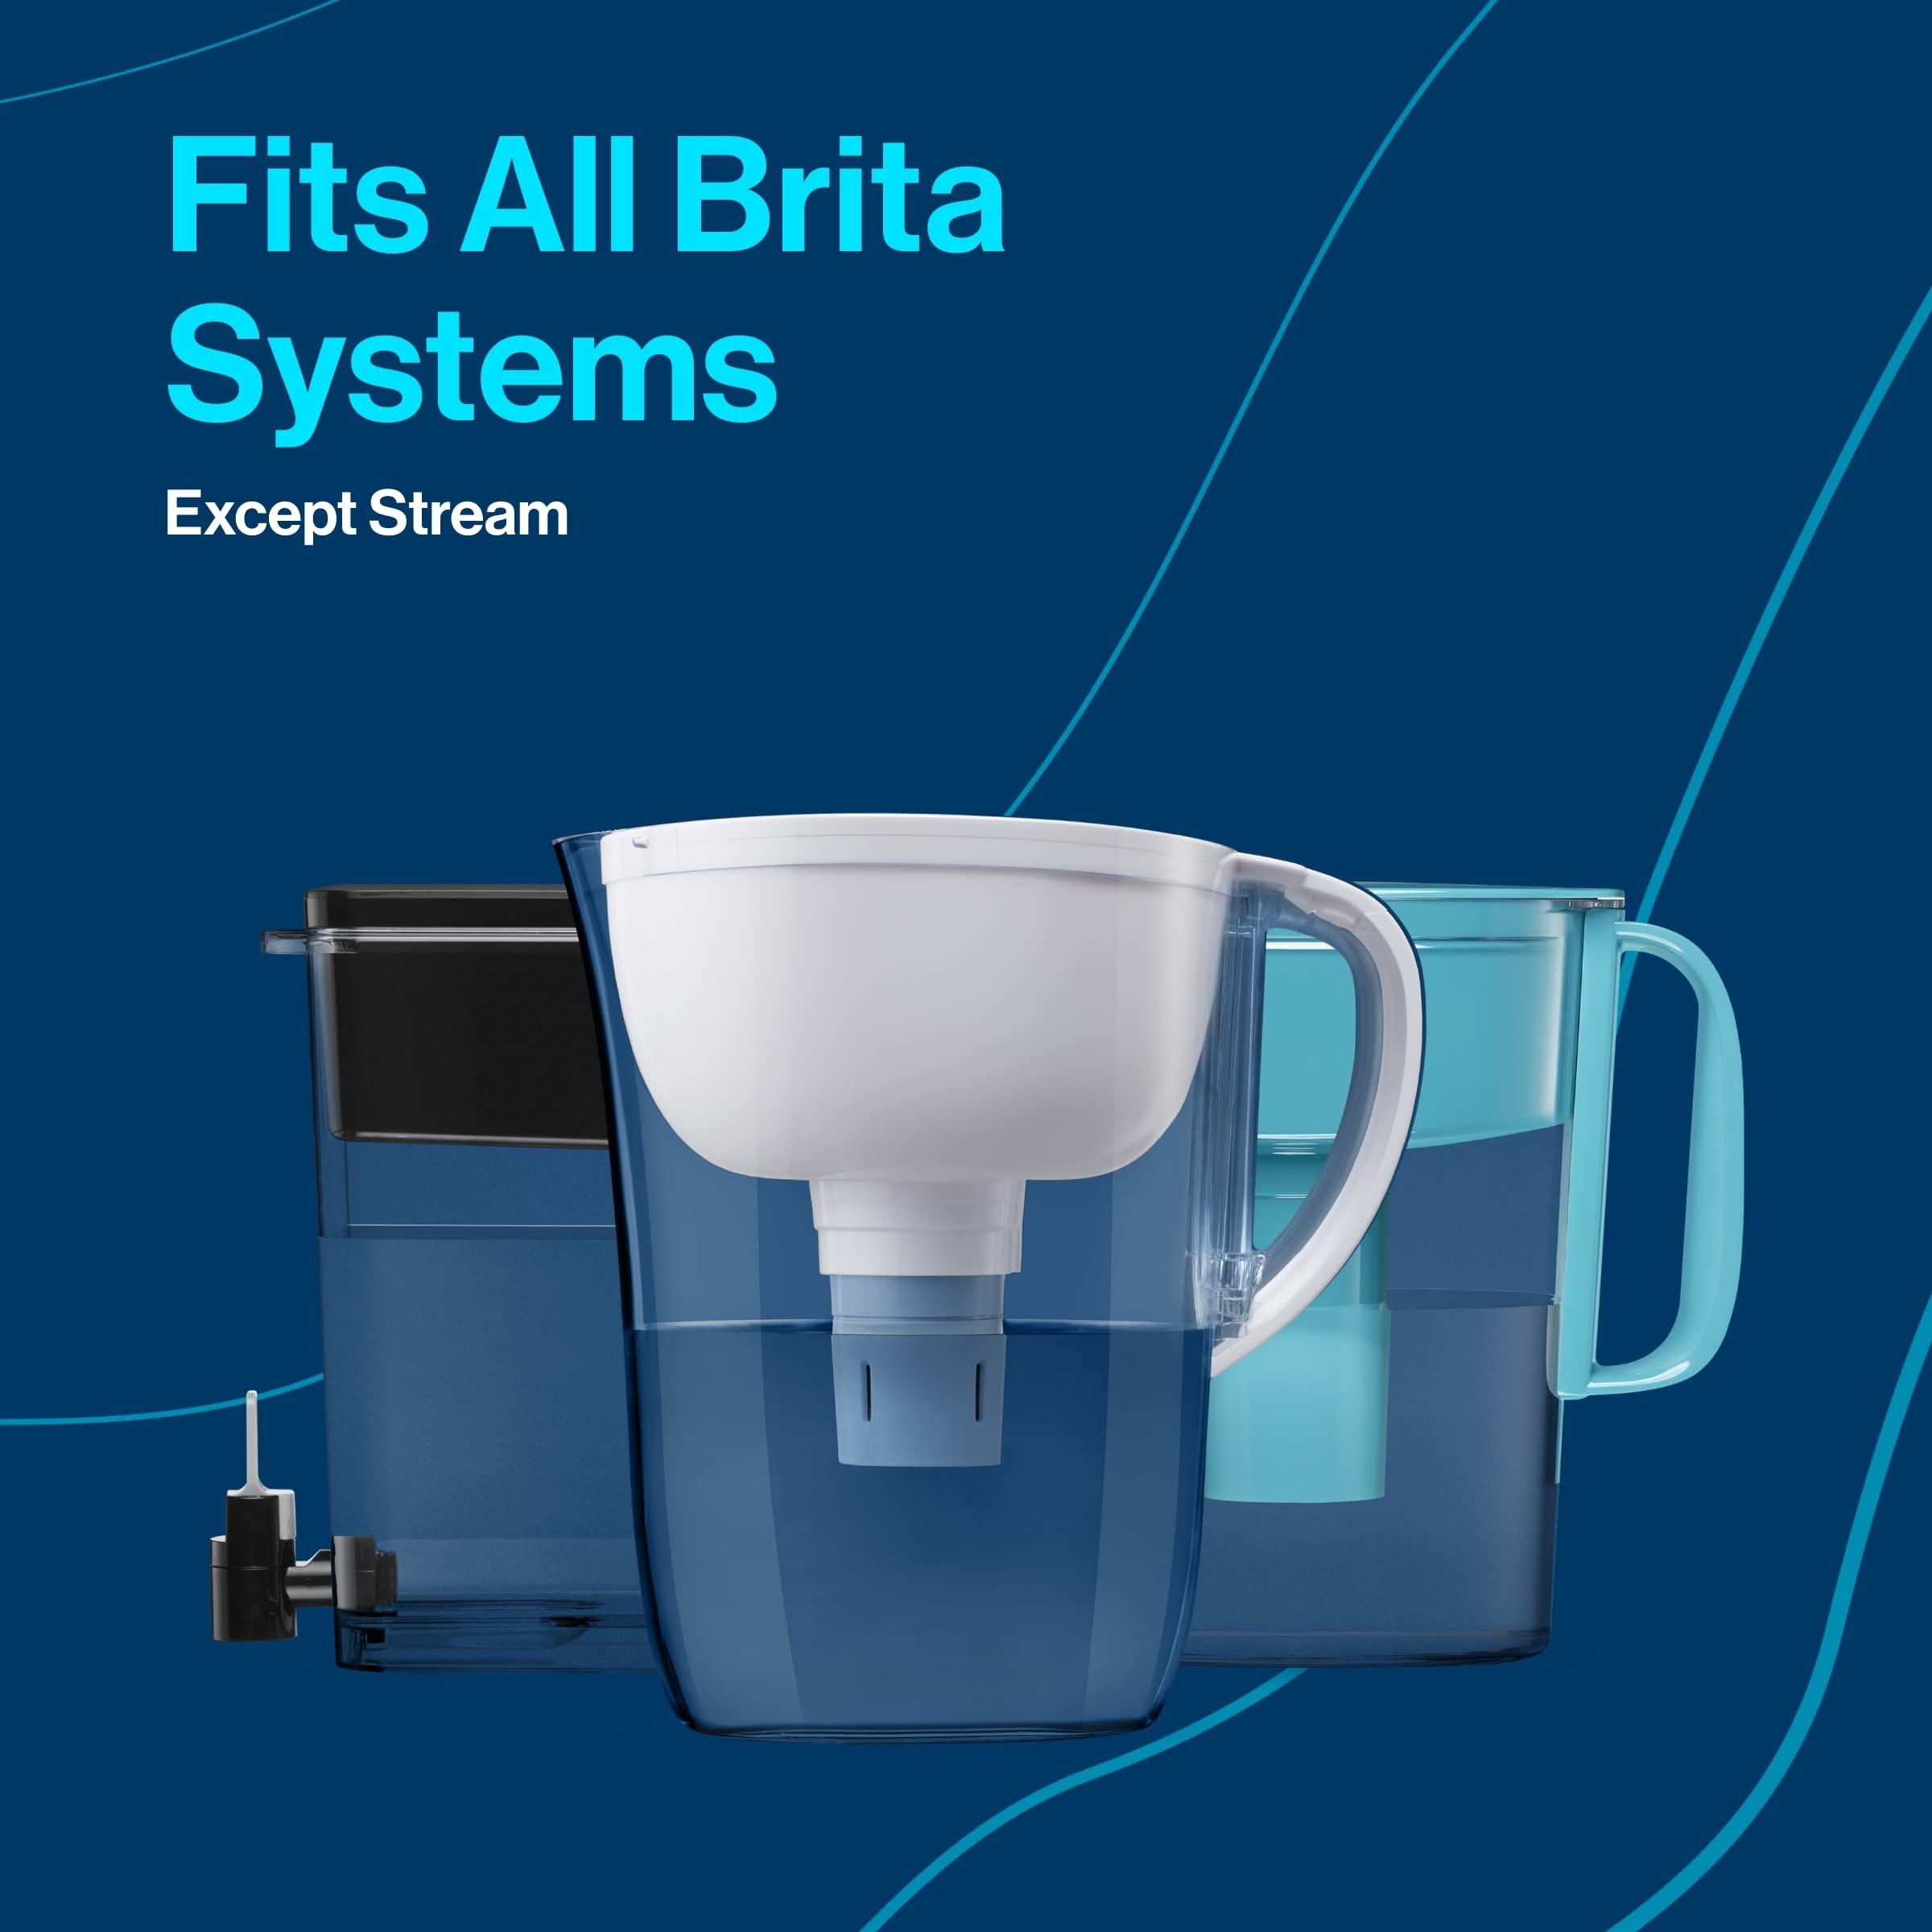 Brita Elite Water Filter Replacements for Pitchers and Dispensers, Reduces 99% of Lead from Tap Water, Lasts 6 Months, 1 Count